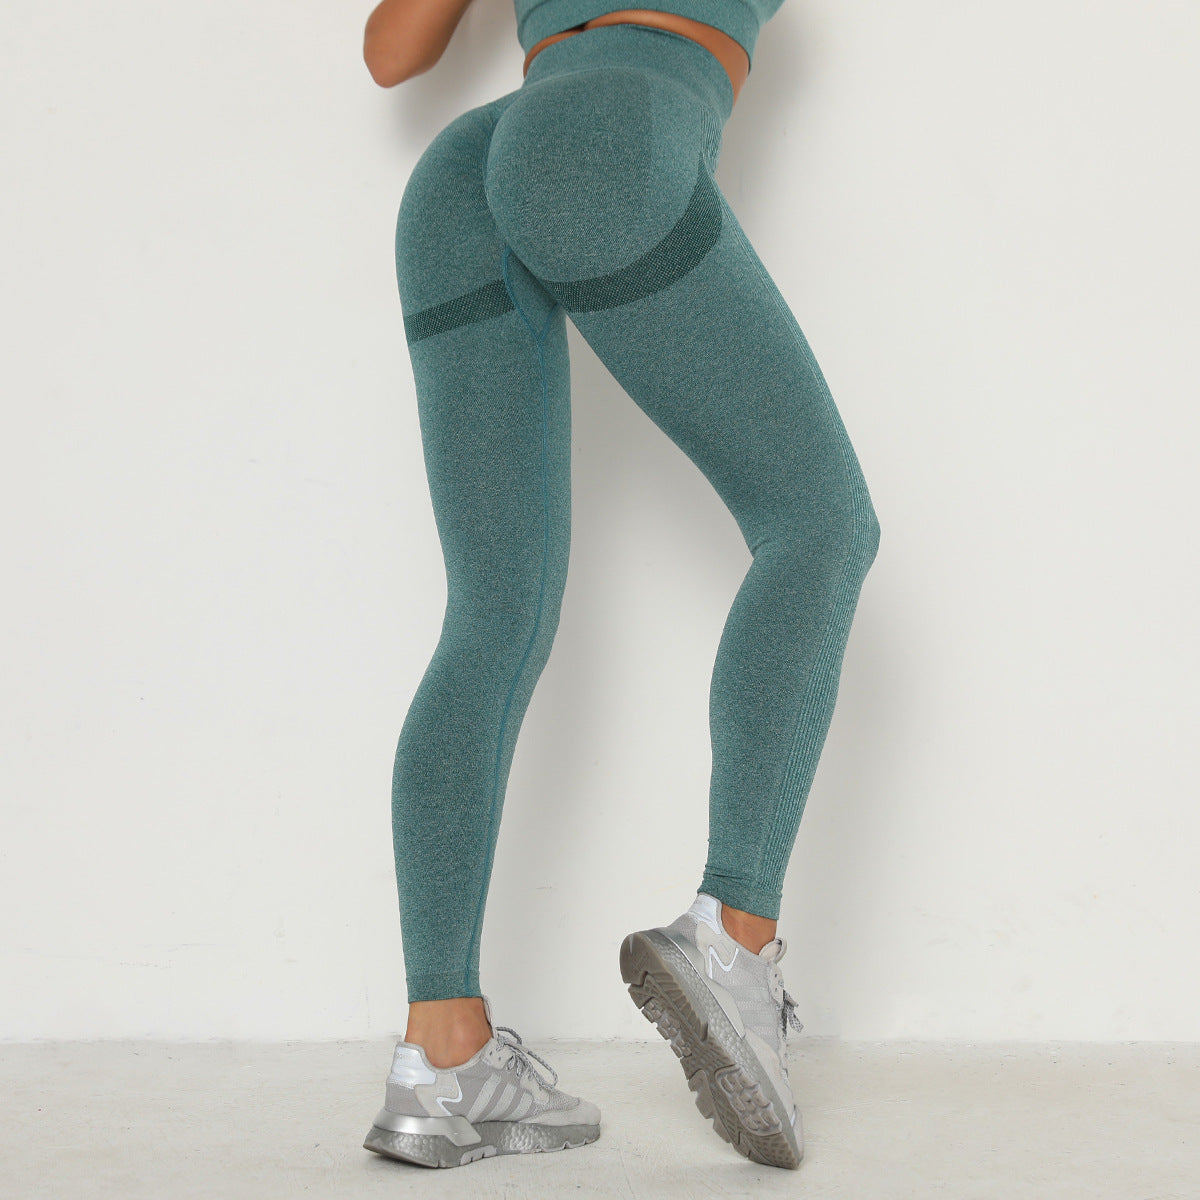  Scrunch Butt Lifting Leggings For Women High Waisted Boom  Booty Workout Seamless Yoga Pants Peach Lift Tights